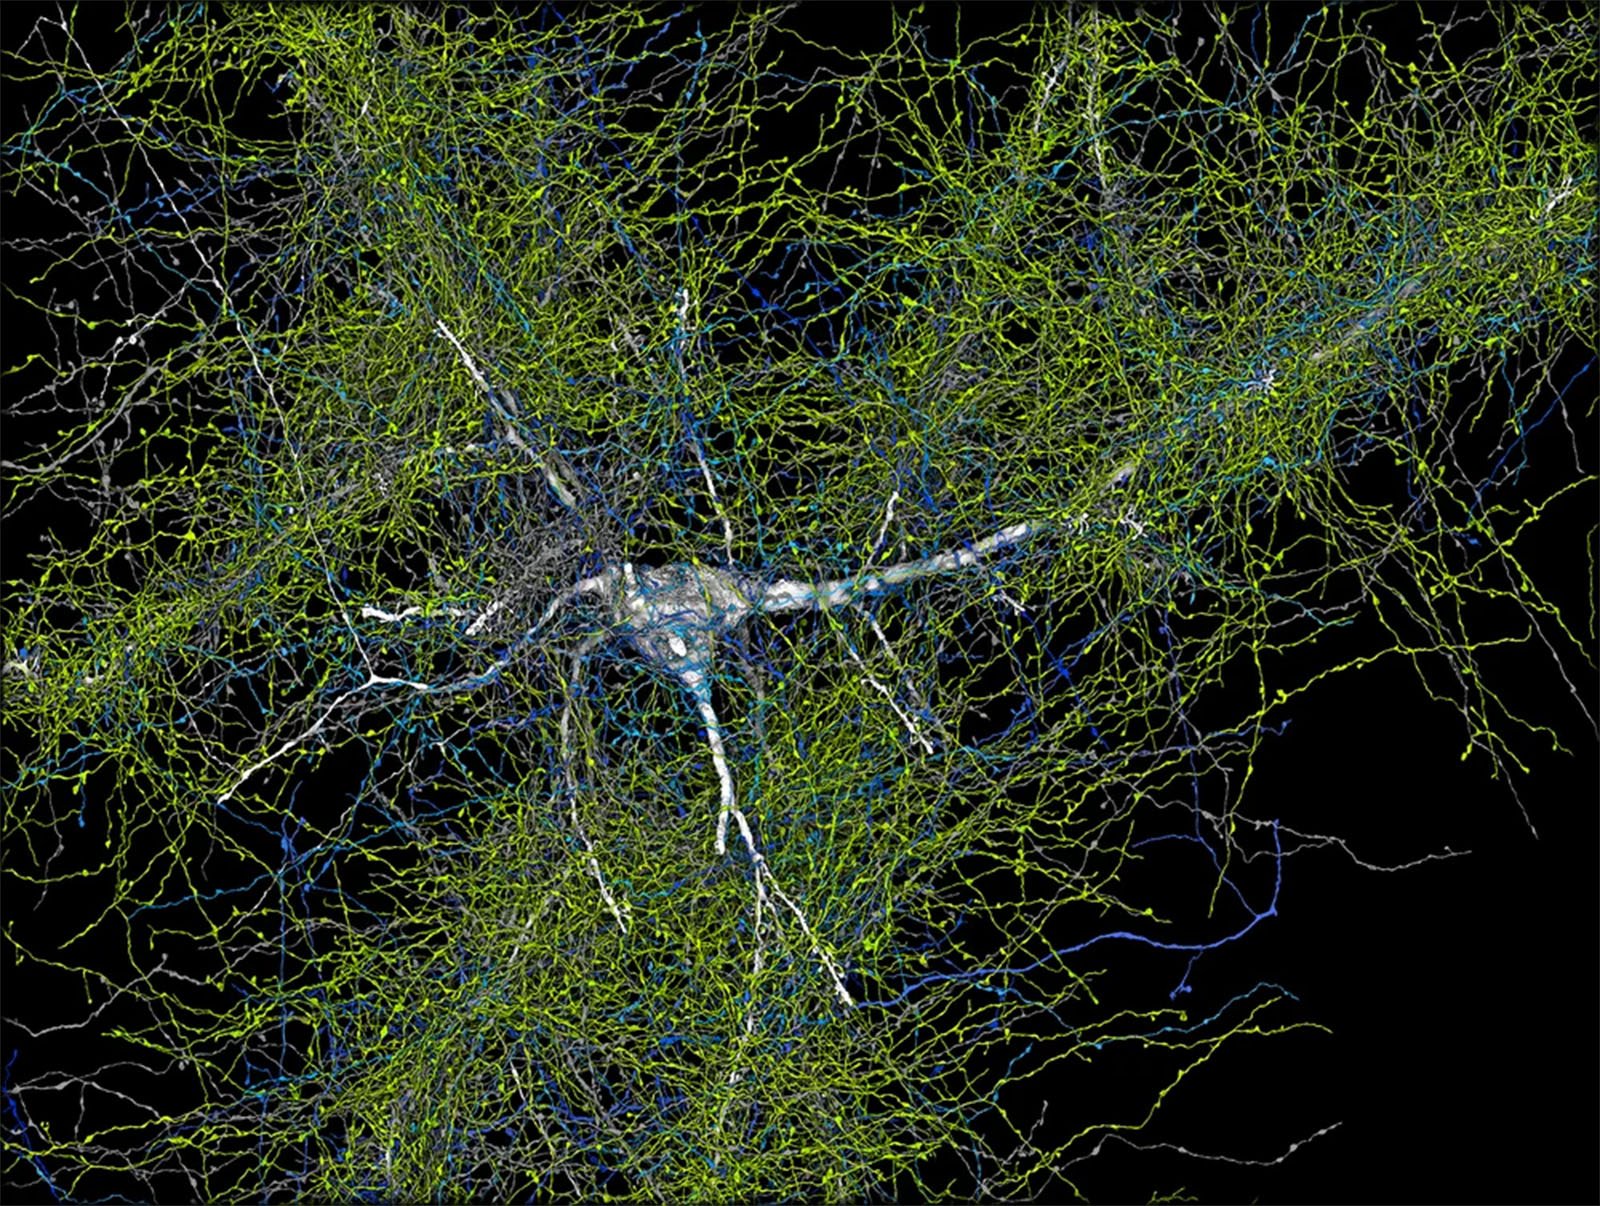 A microscopic image displaying a dense network of neurons with intricate branching, highlighted in various bright colors against a dark background, emphasizing the complex connectivity of the brain.